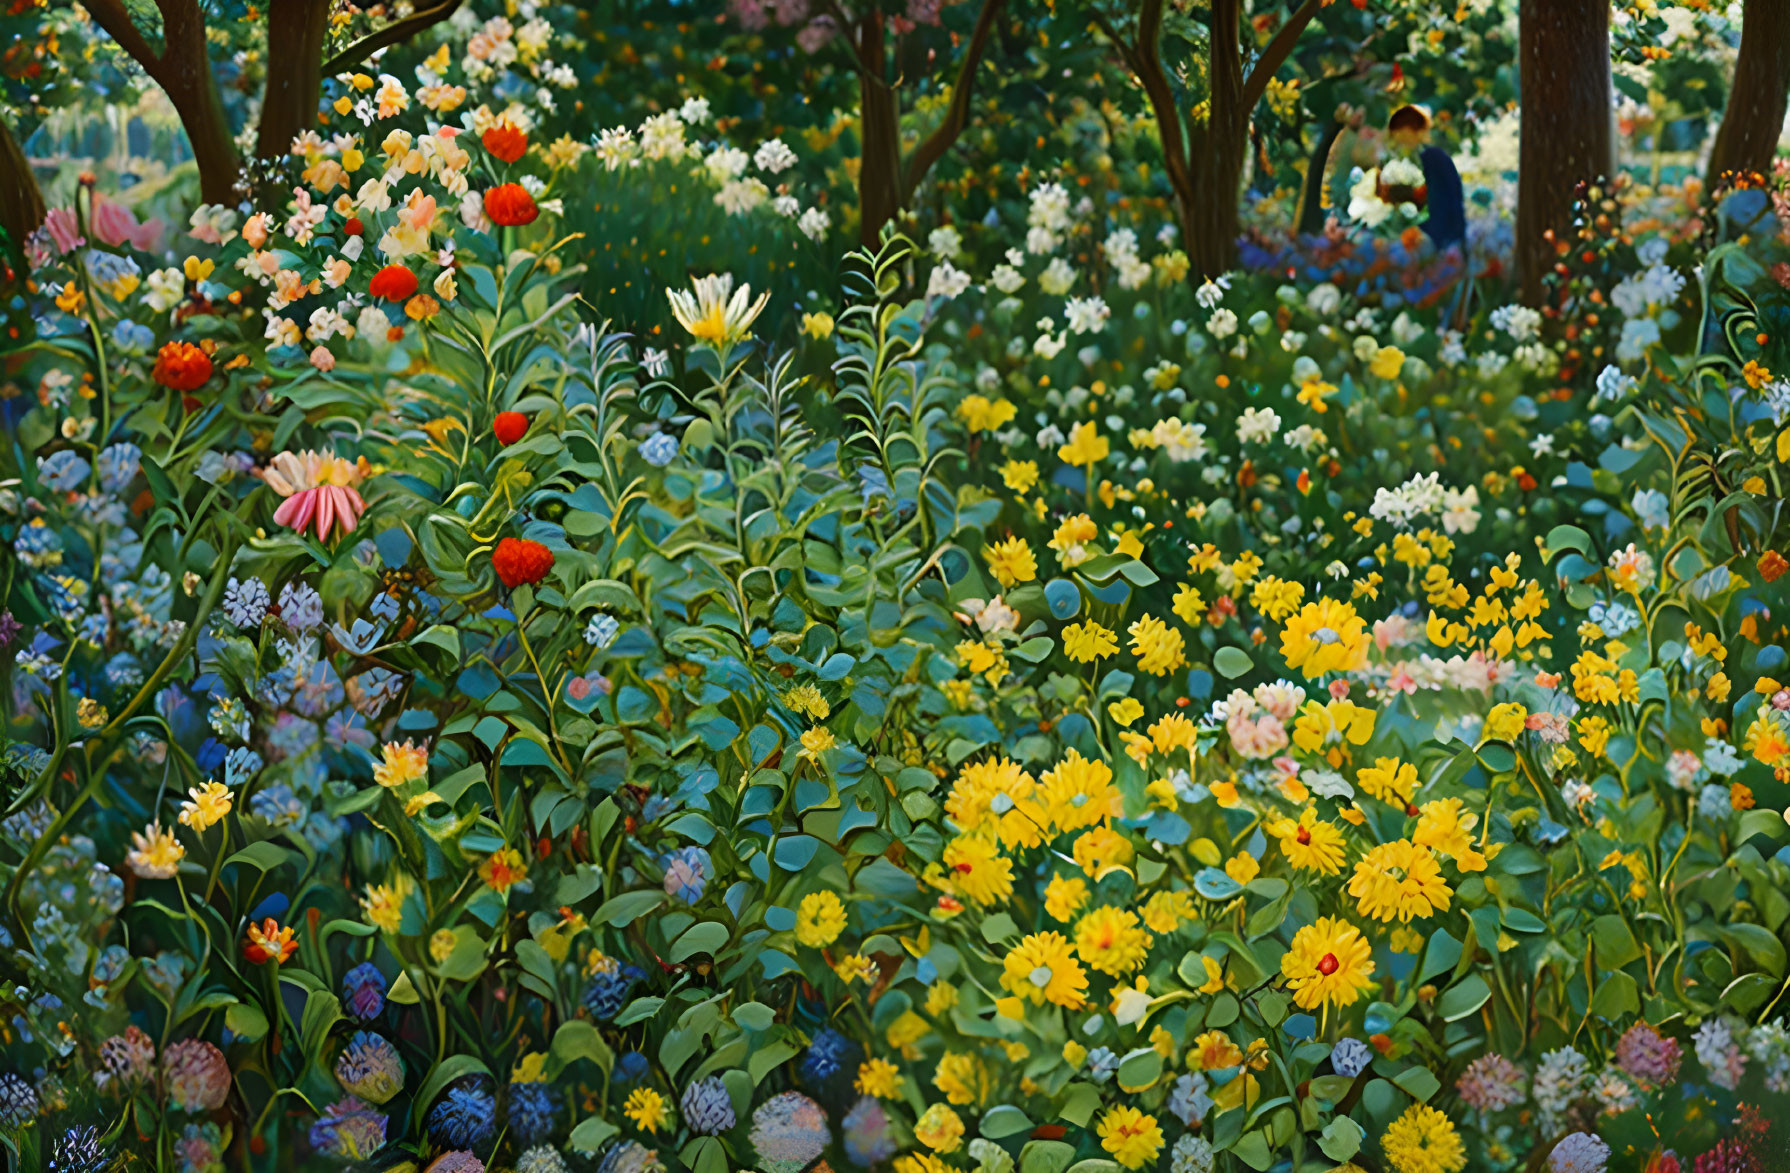 Colorful Flower Garden with Lush Greenery and Blurred Figures